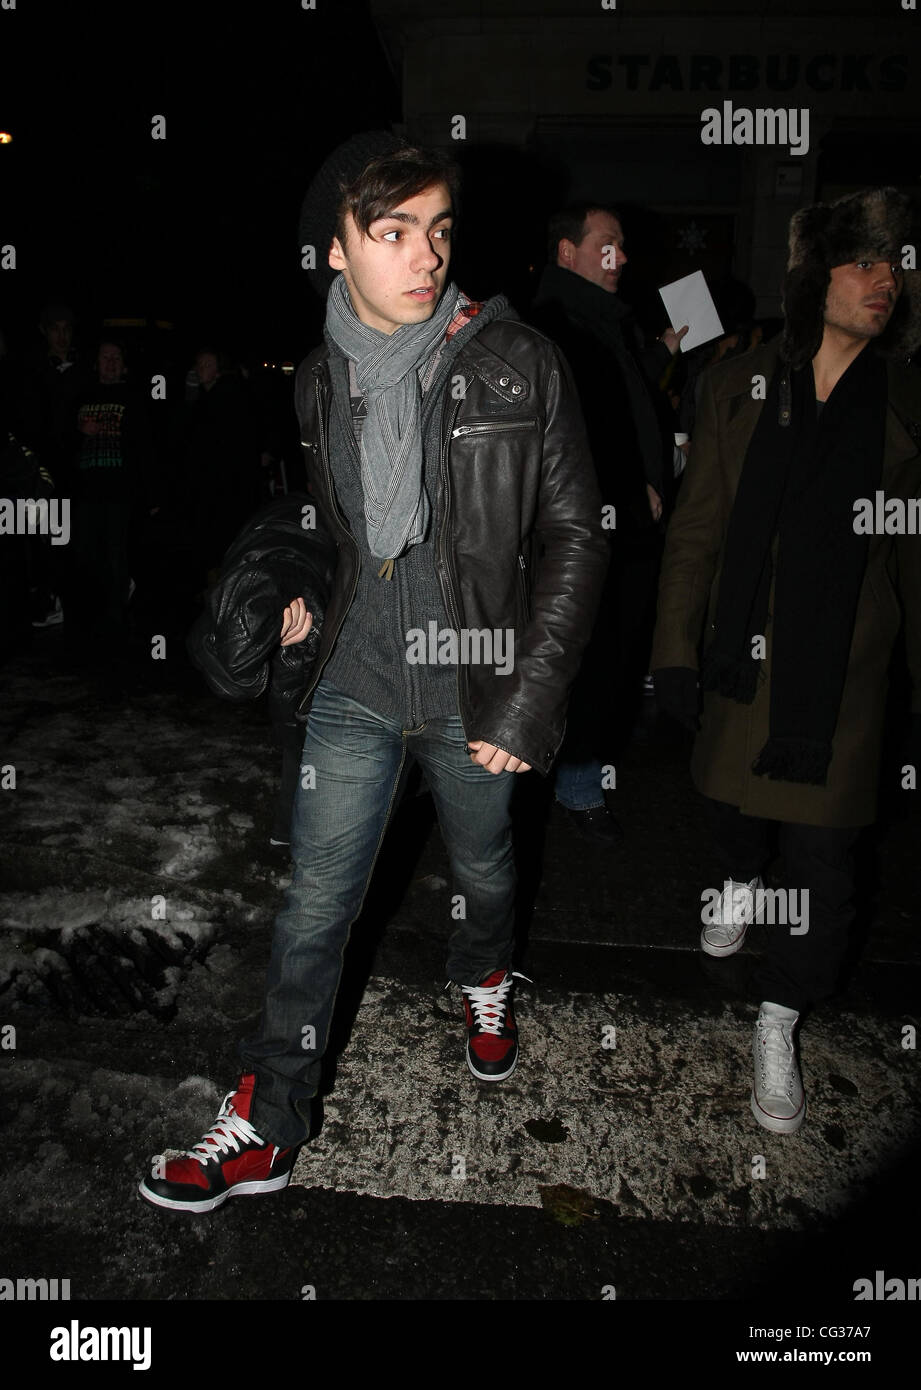 Nathan Sykes of The Wanted at Radio One London, England - 19.12.10 Stock Photo